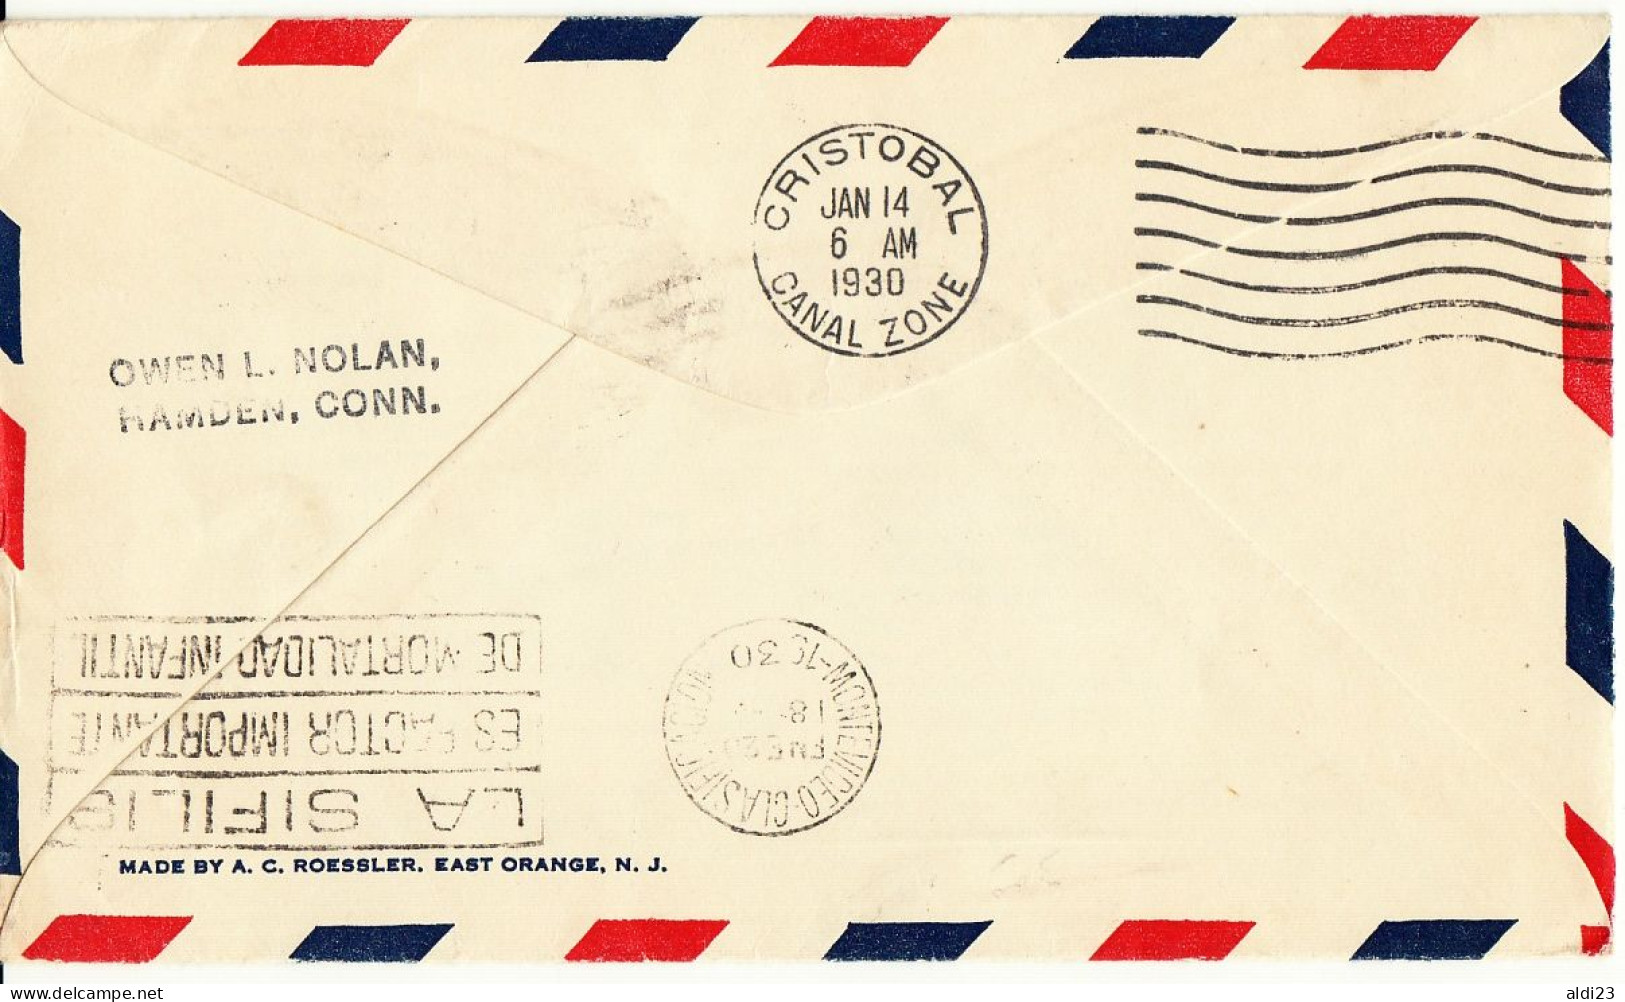 Beautiful Air Mail Cover Uruguay World Cup 1930 With Cancellation "CONGREGARA". Very Rare. - 1930 – Uruguay